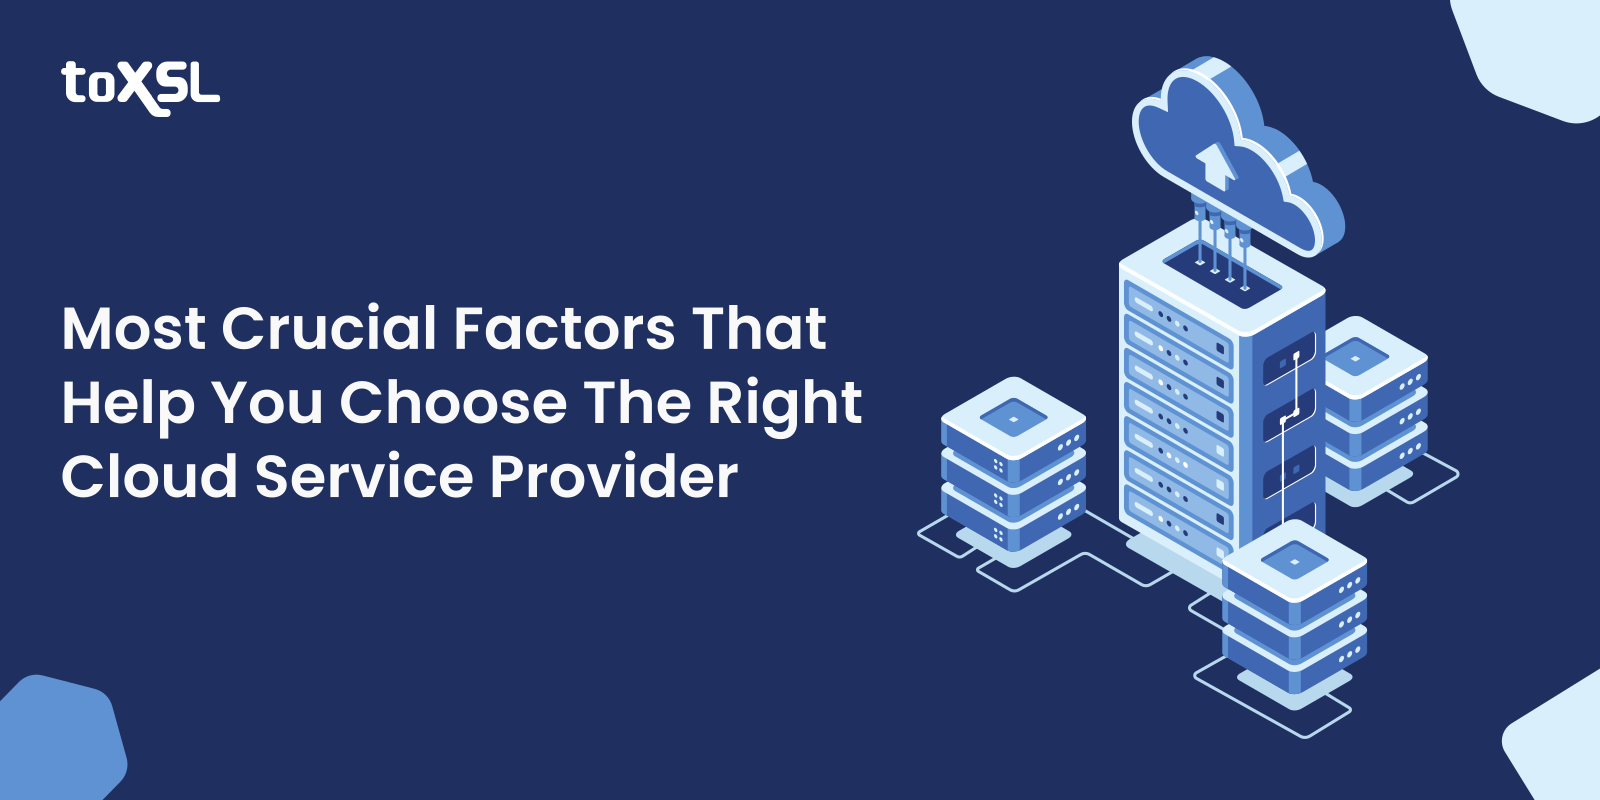 Most Crucial Factors That Help You Choose The Right Cloud Service Provider